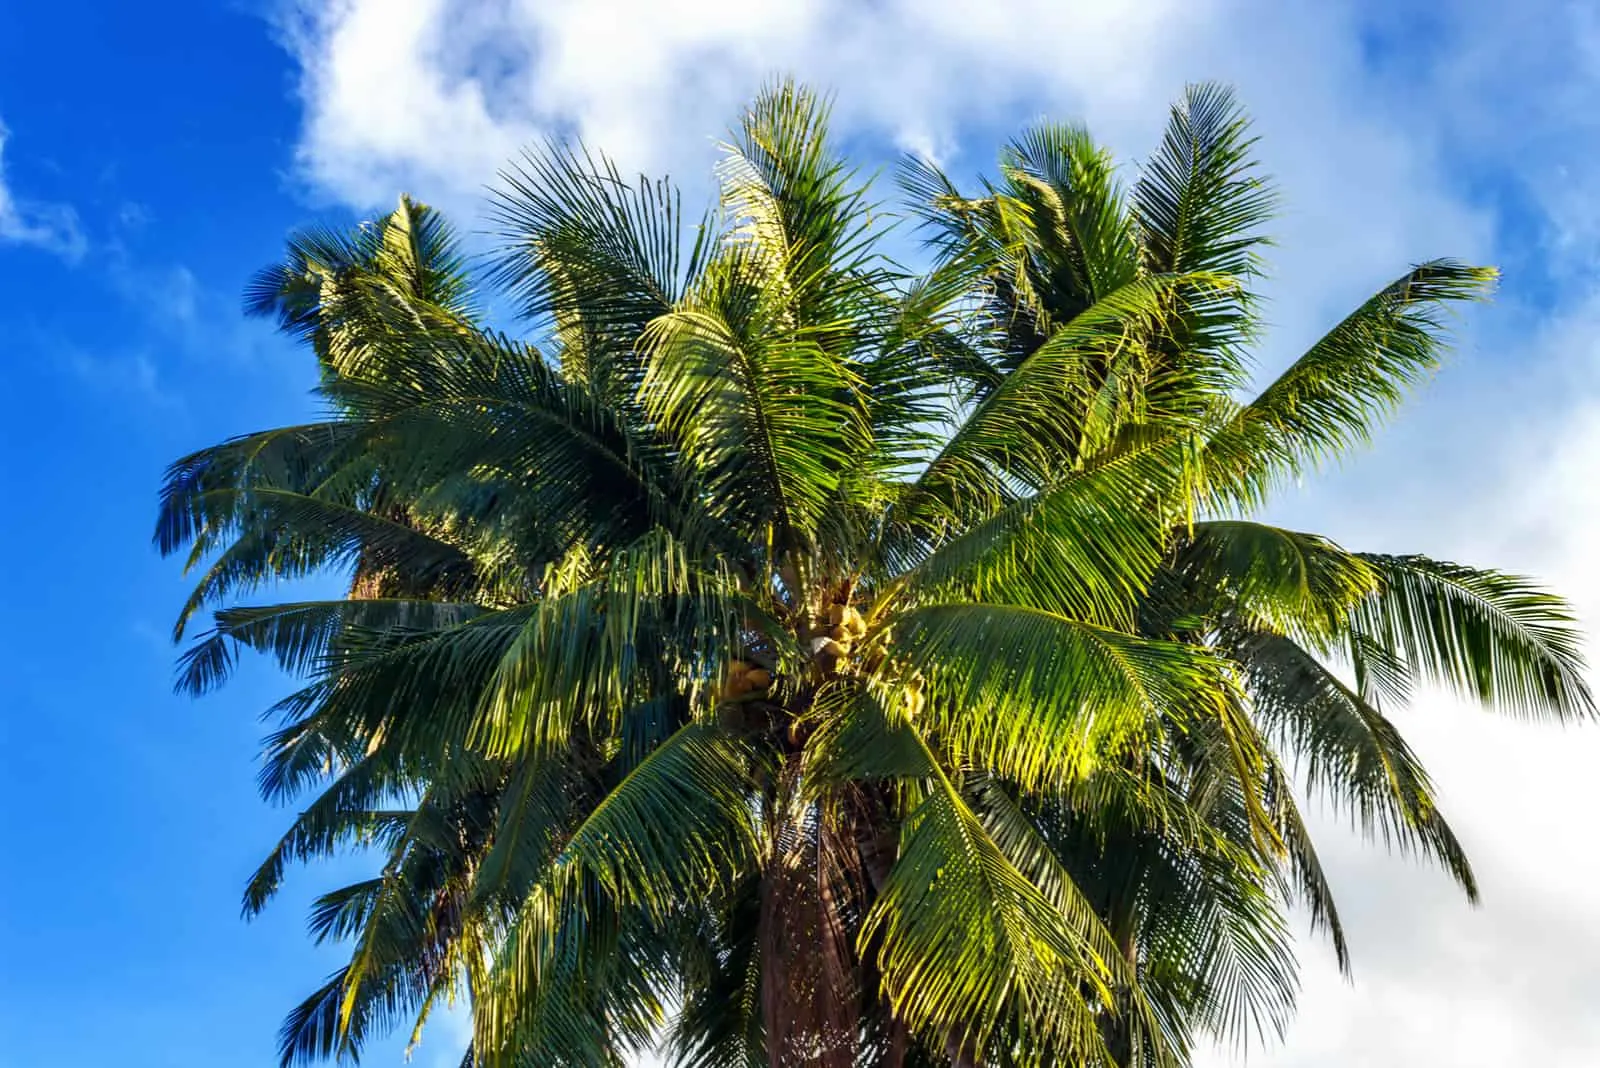 Palm tree with coconuts against the blue sky